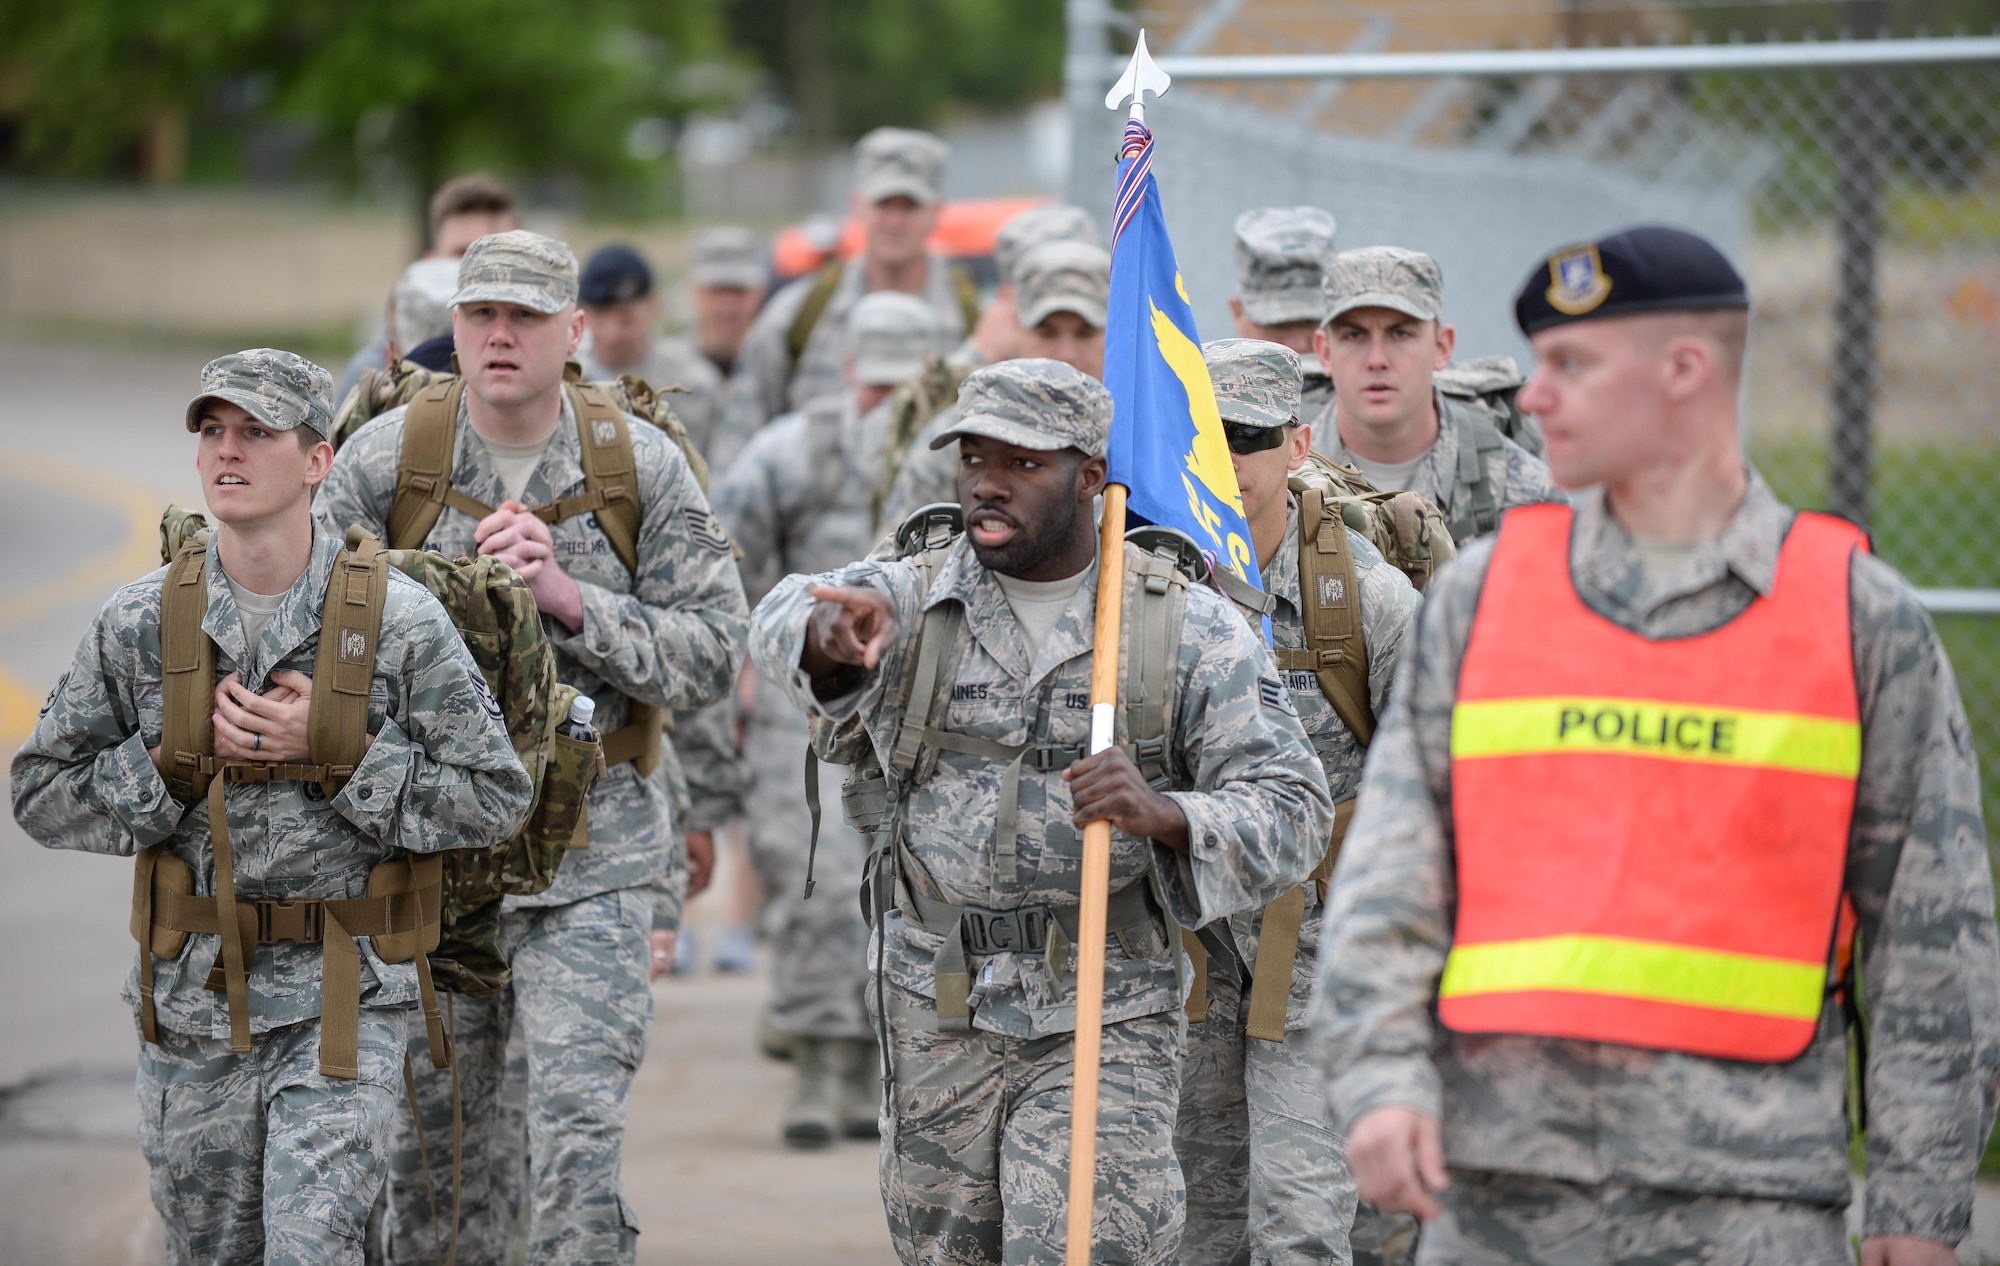 Airmen assigned to the 55th Security Forces Squadron prepare for a ruck march at Offutt Air Force Base, Neb., May 16, 2016 as part of the opening ceremony for National Police Week. Police Week in an annual celebration and time to honor law enforcement officials and agencies throughout the nation. (U.S. Air Force photo by Zachary Hada)